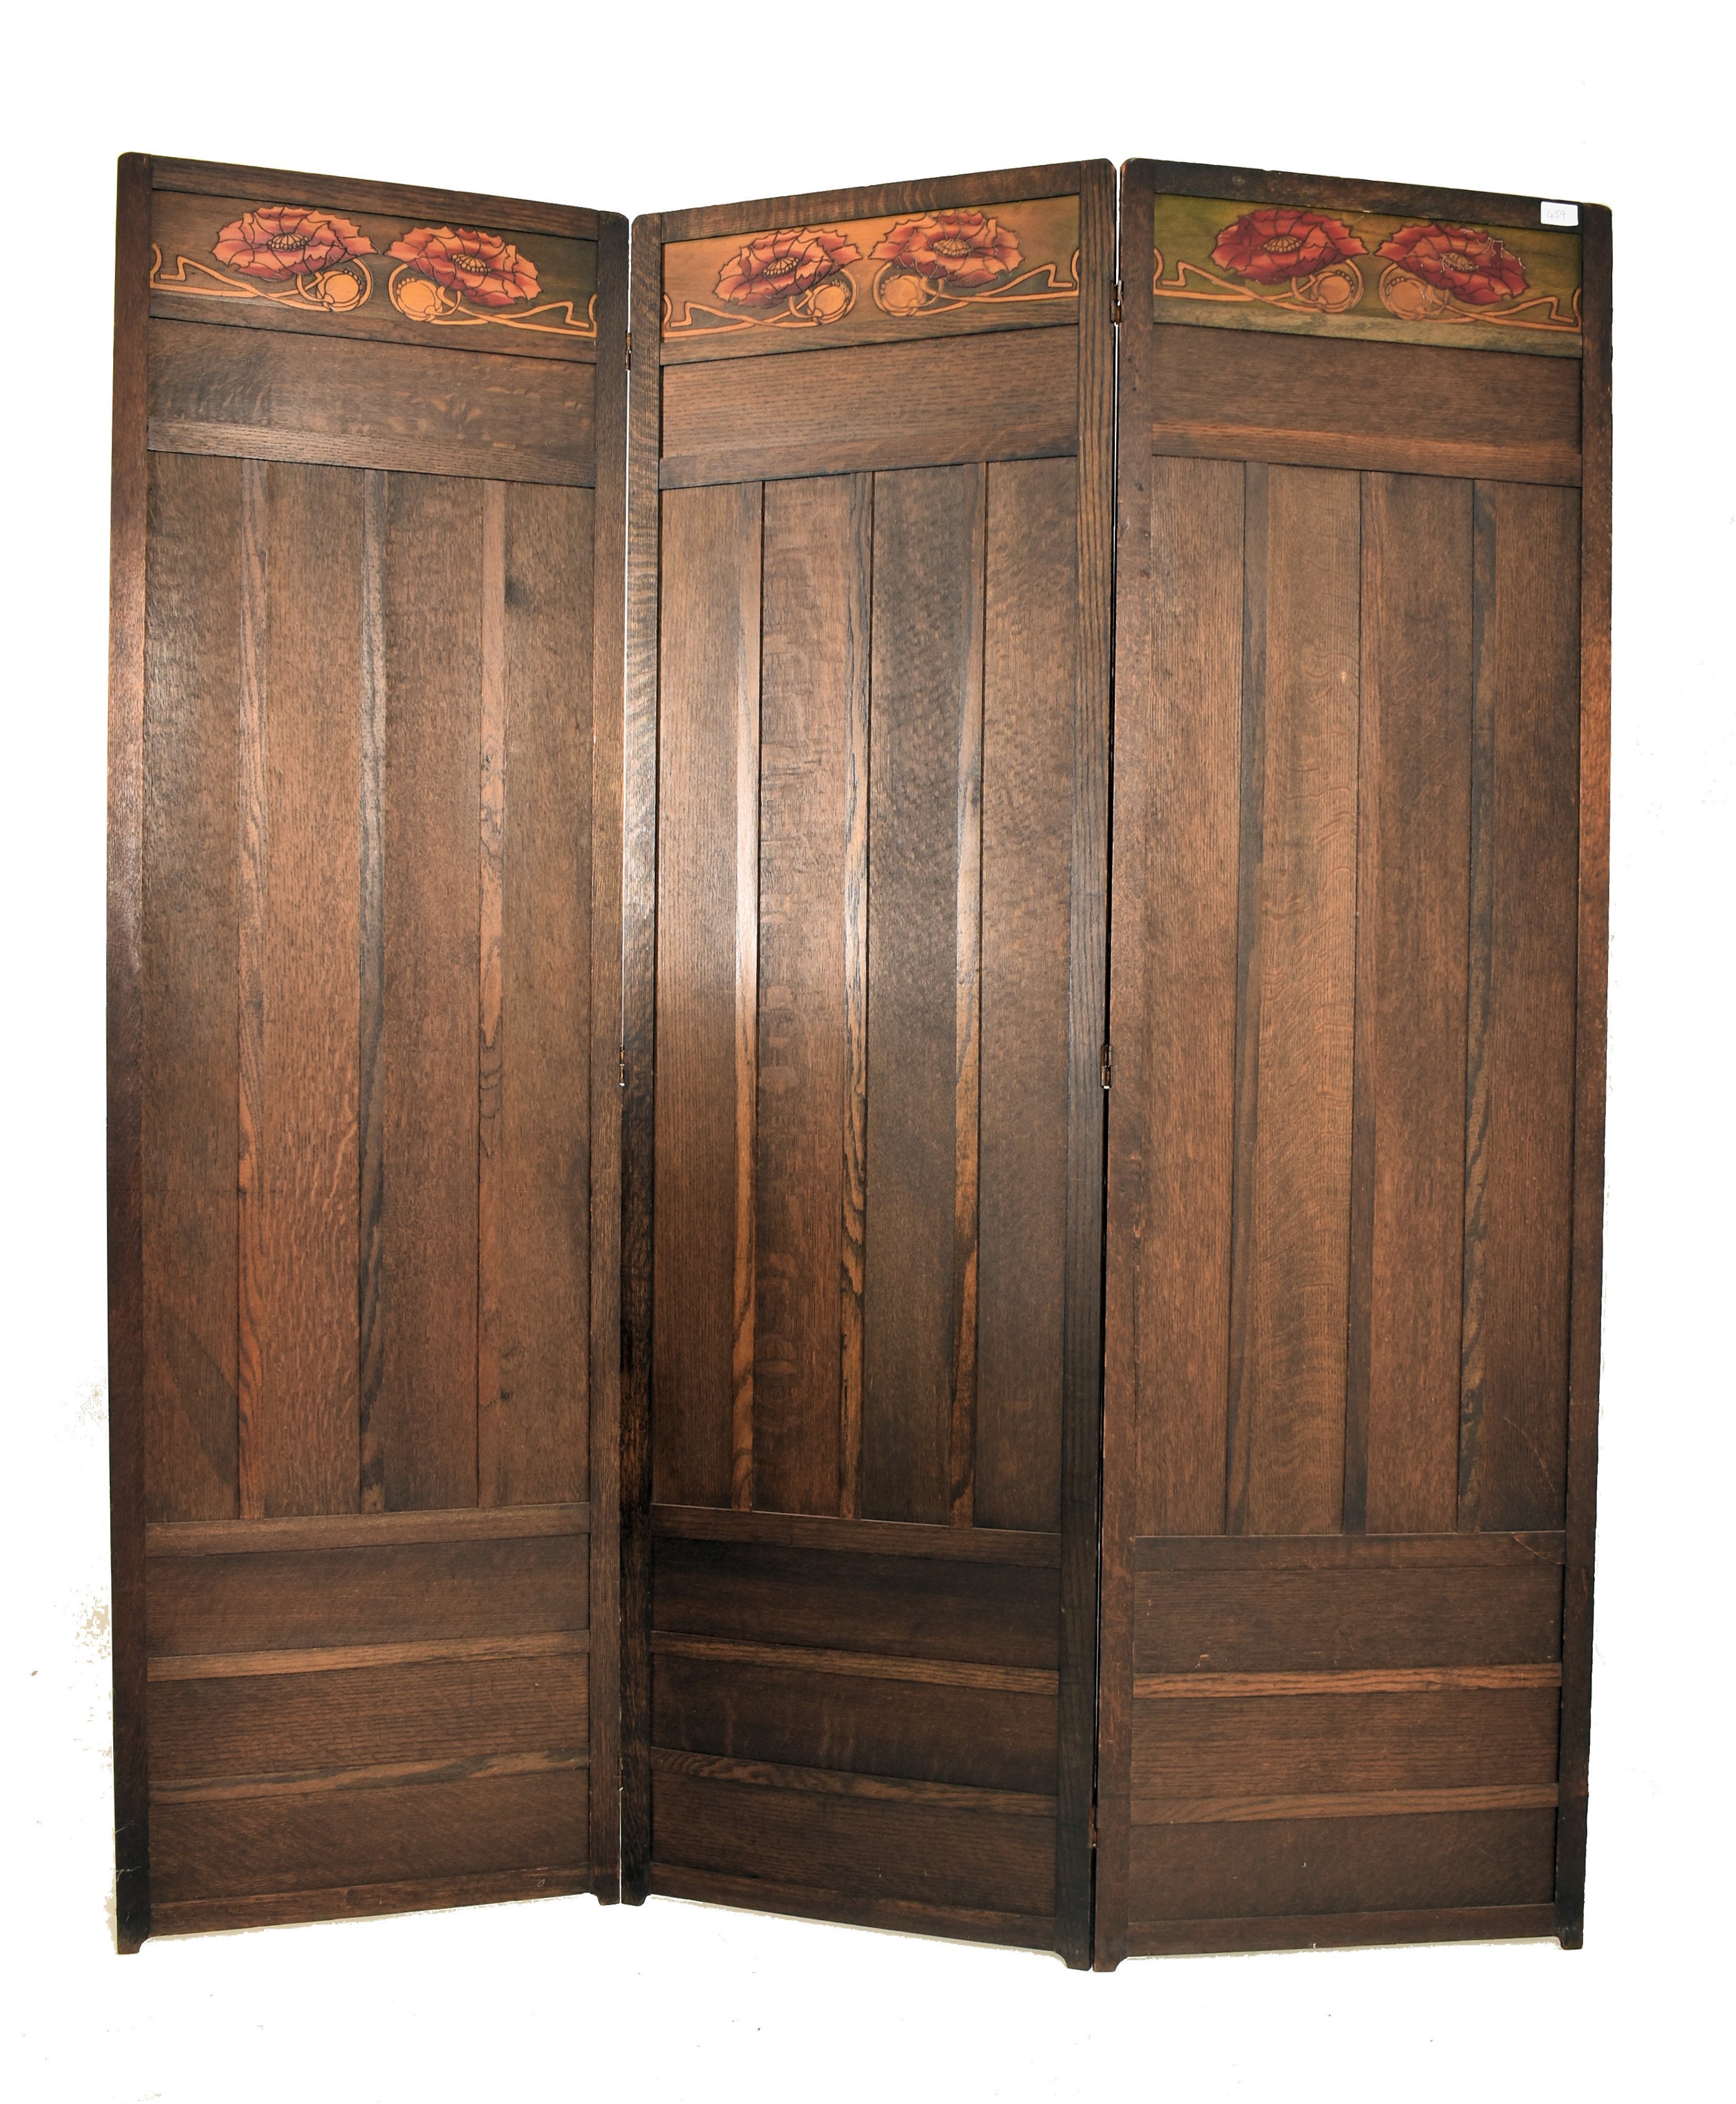 LATE 19TH CENTURY ARTS & CRAFTS LIBERTY & CO SCREEN